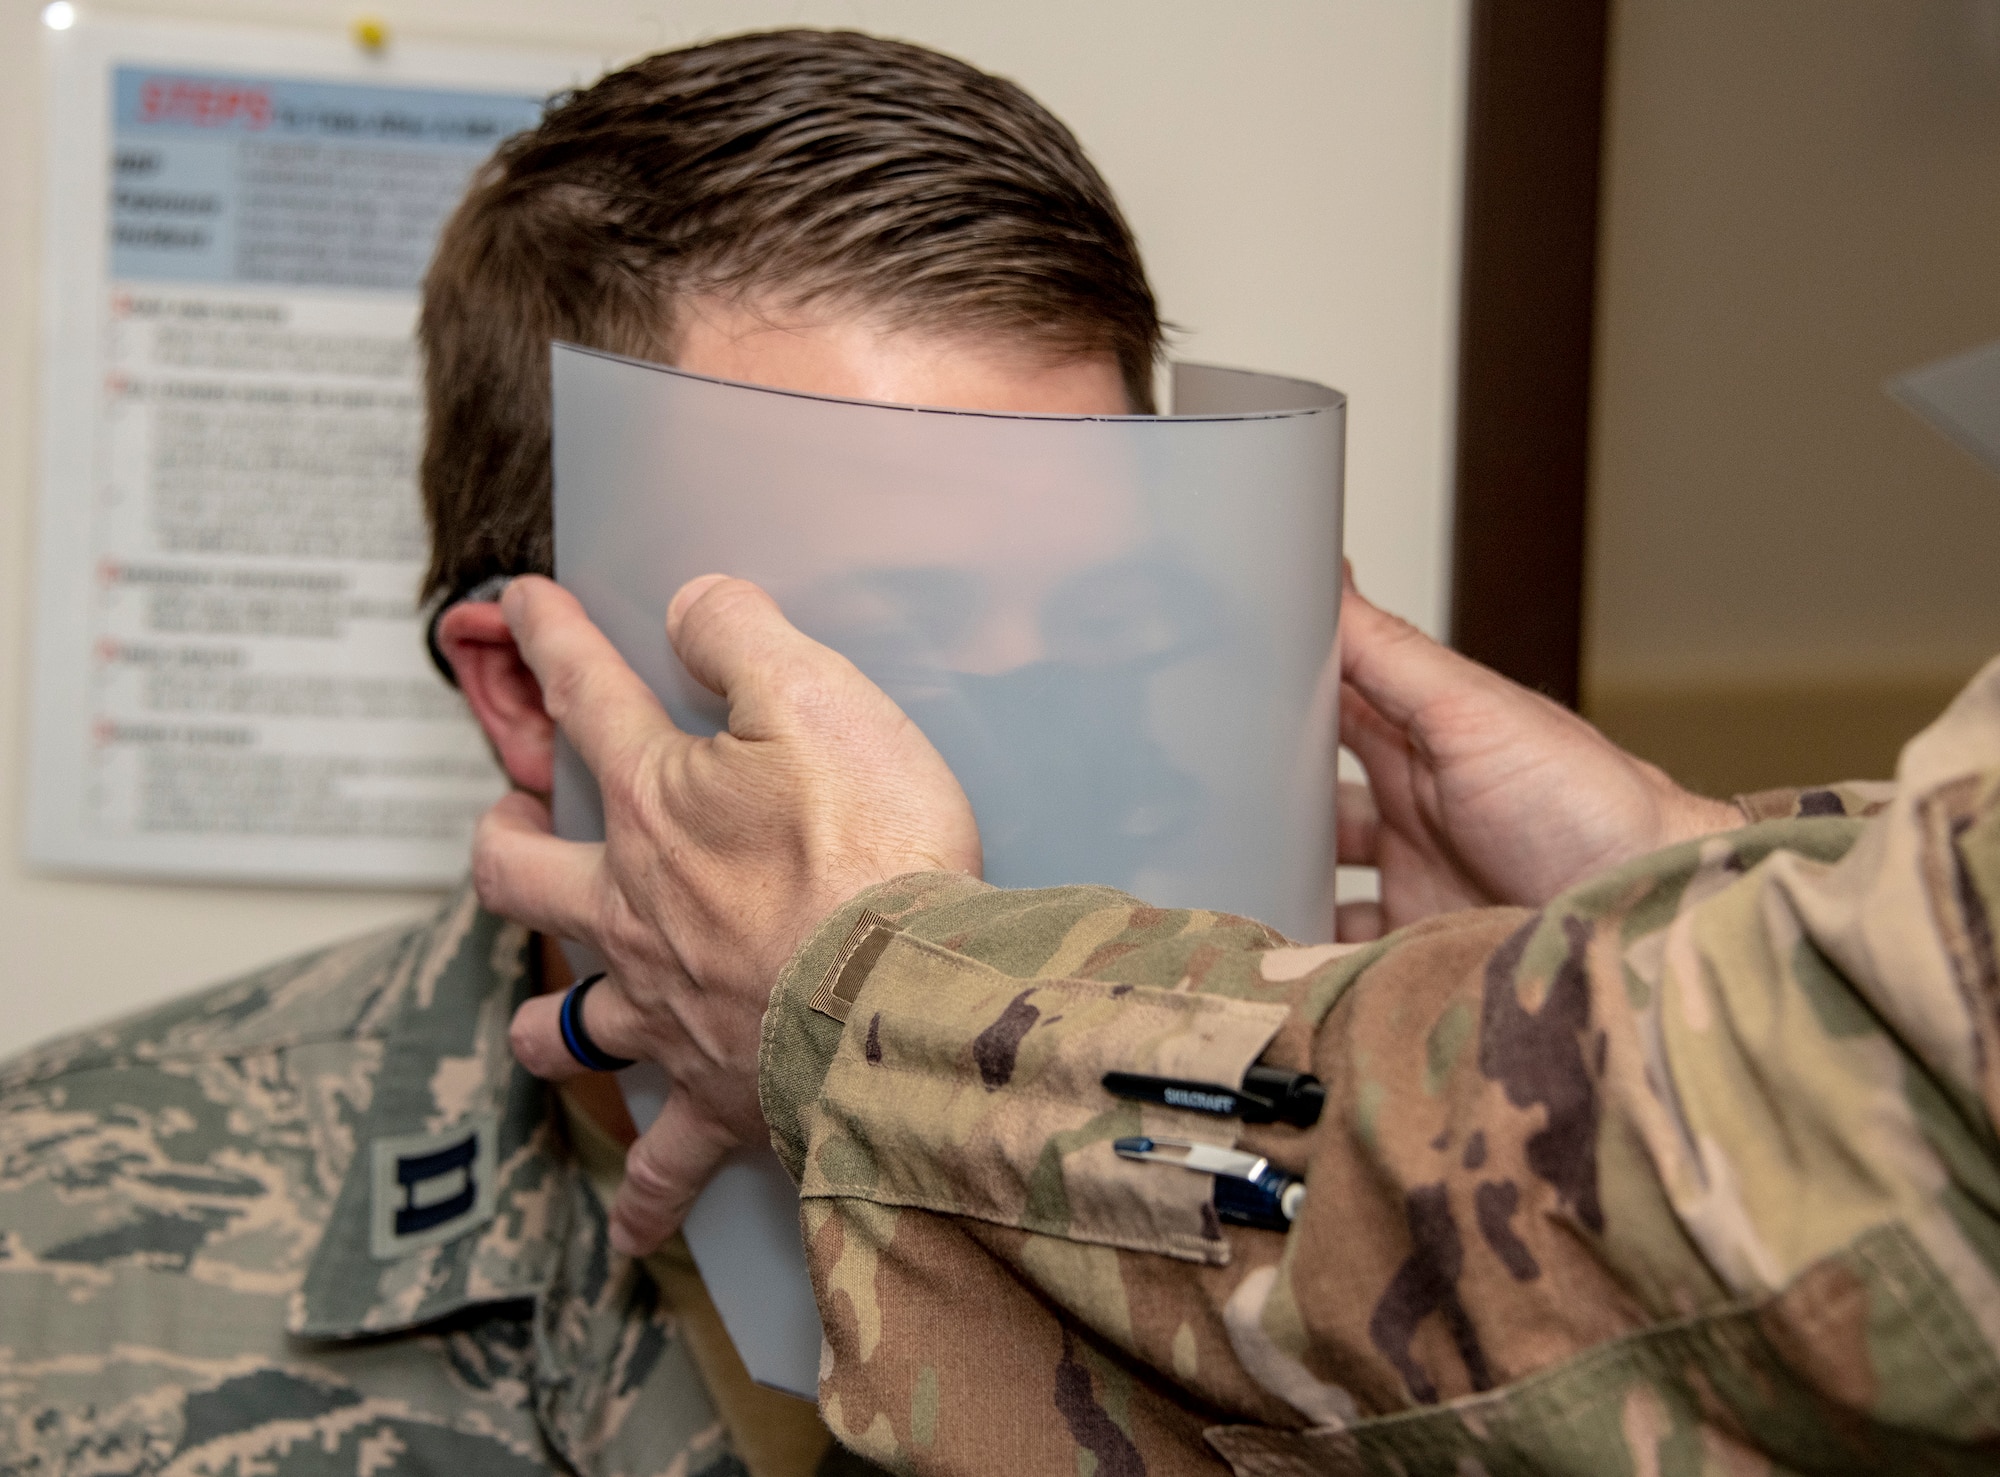 U.S. Air Force Lt. Col. Aaron Weaver, 60th Aerospace Medicine Squadron Bioenvironmental Engineering Flight commander, tests the fit of a plastic face shield on a pair of medical binocular loupes worn by Capt. Geoffrey Johnston, 60th Dental Squadron prosthodontist, April 13, 2020, at Travis Air Force Base, California. The bioenvironmental engineering flight, 60th DS, 60th Air Mobility Wing Phoenix Spark innovation cell and 60th Maintenance Squadron collaborated to design personal protective equipment for David Grant USAF Medical Center. (U.S. Air Force photo by Heide Couch